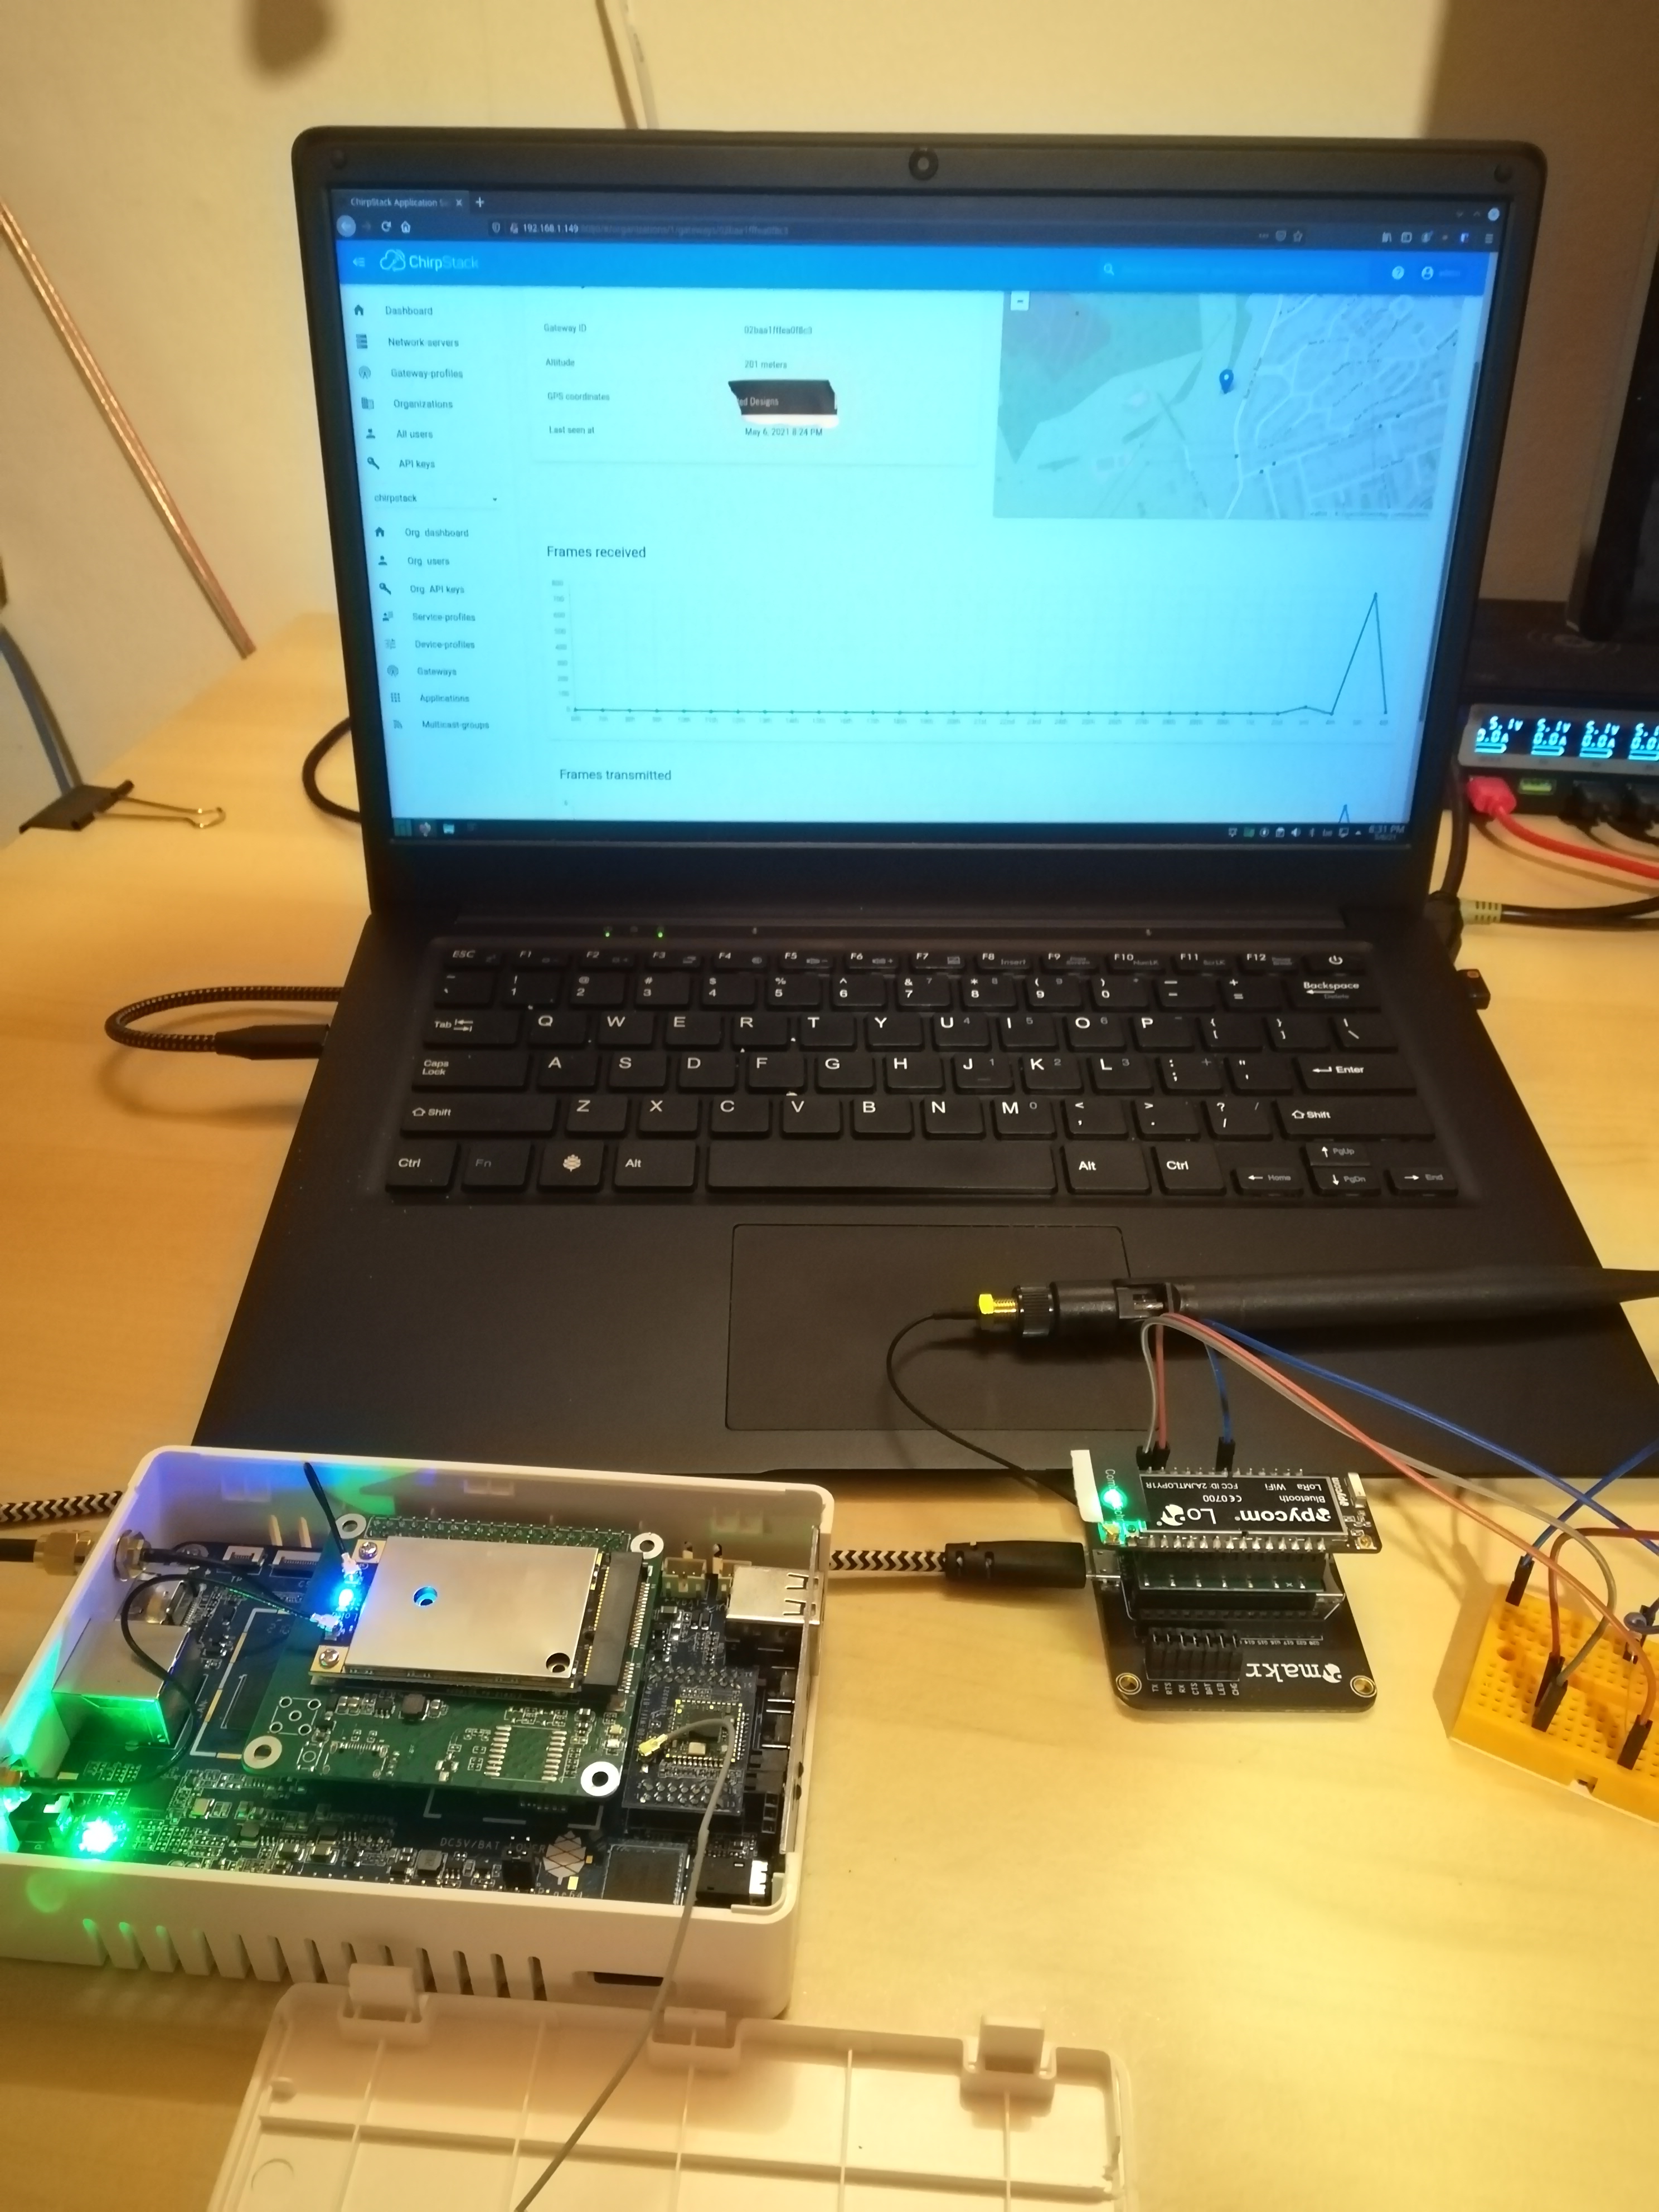 The gateway connected to the local installation of Chirpstack on the left, the Lopy4 board as a LoRaWAN node on the right